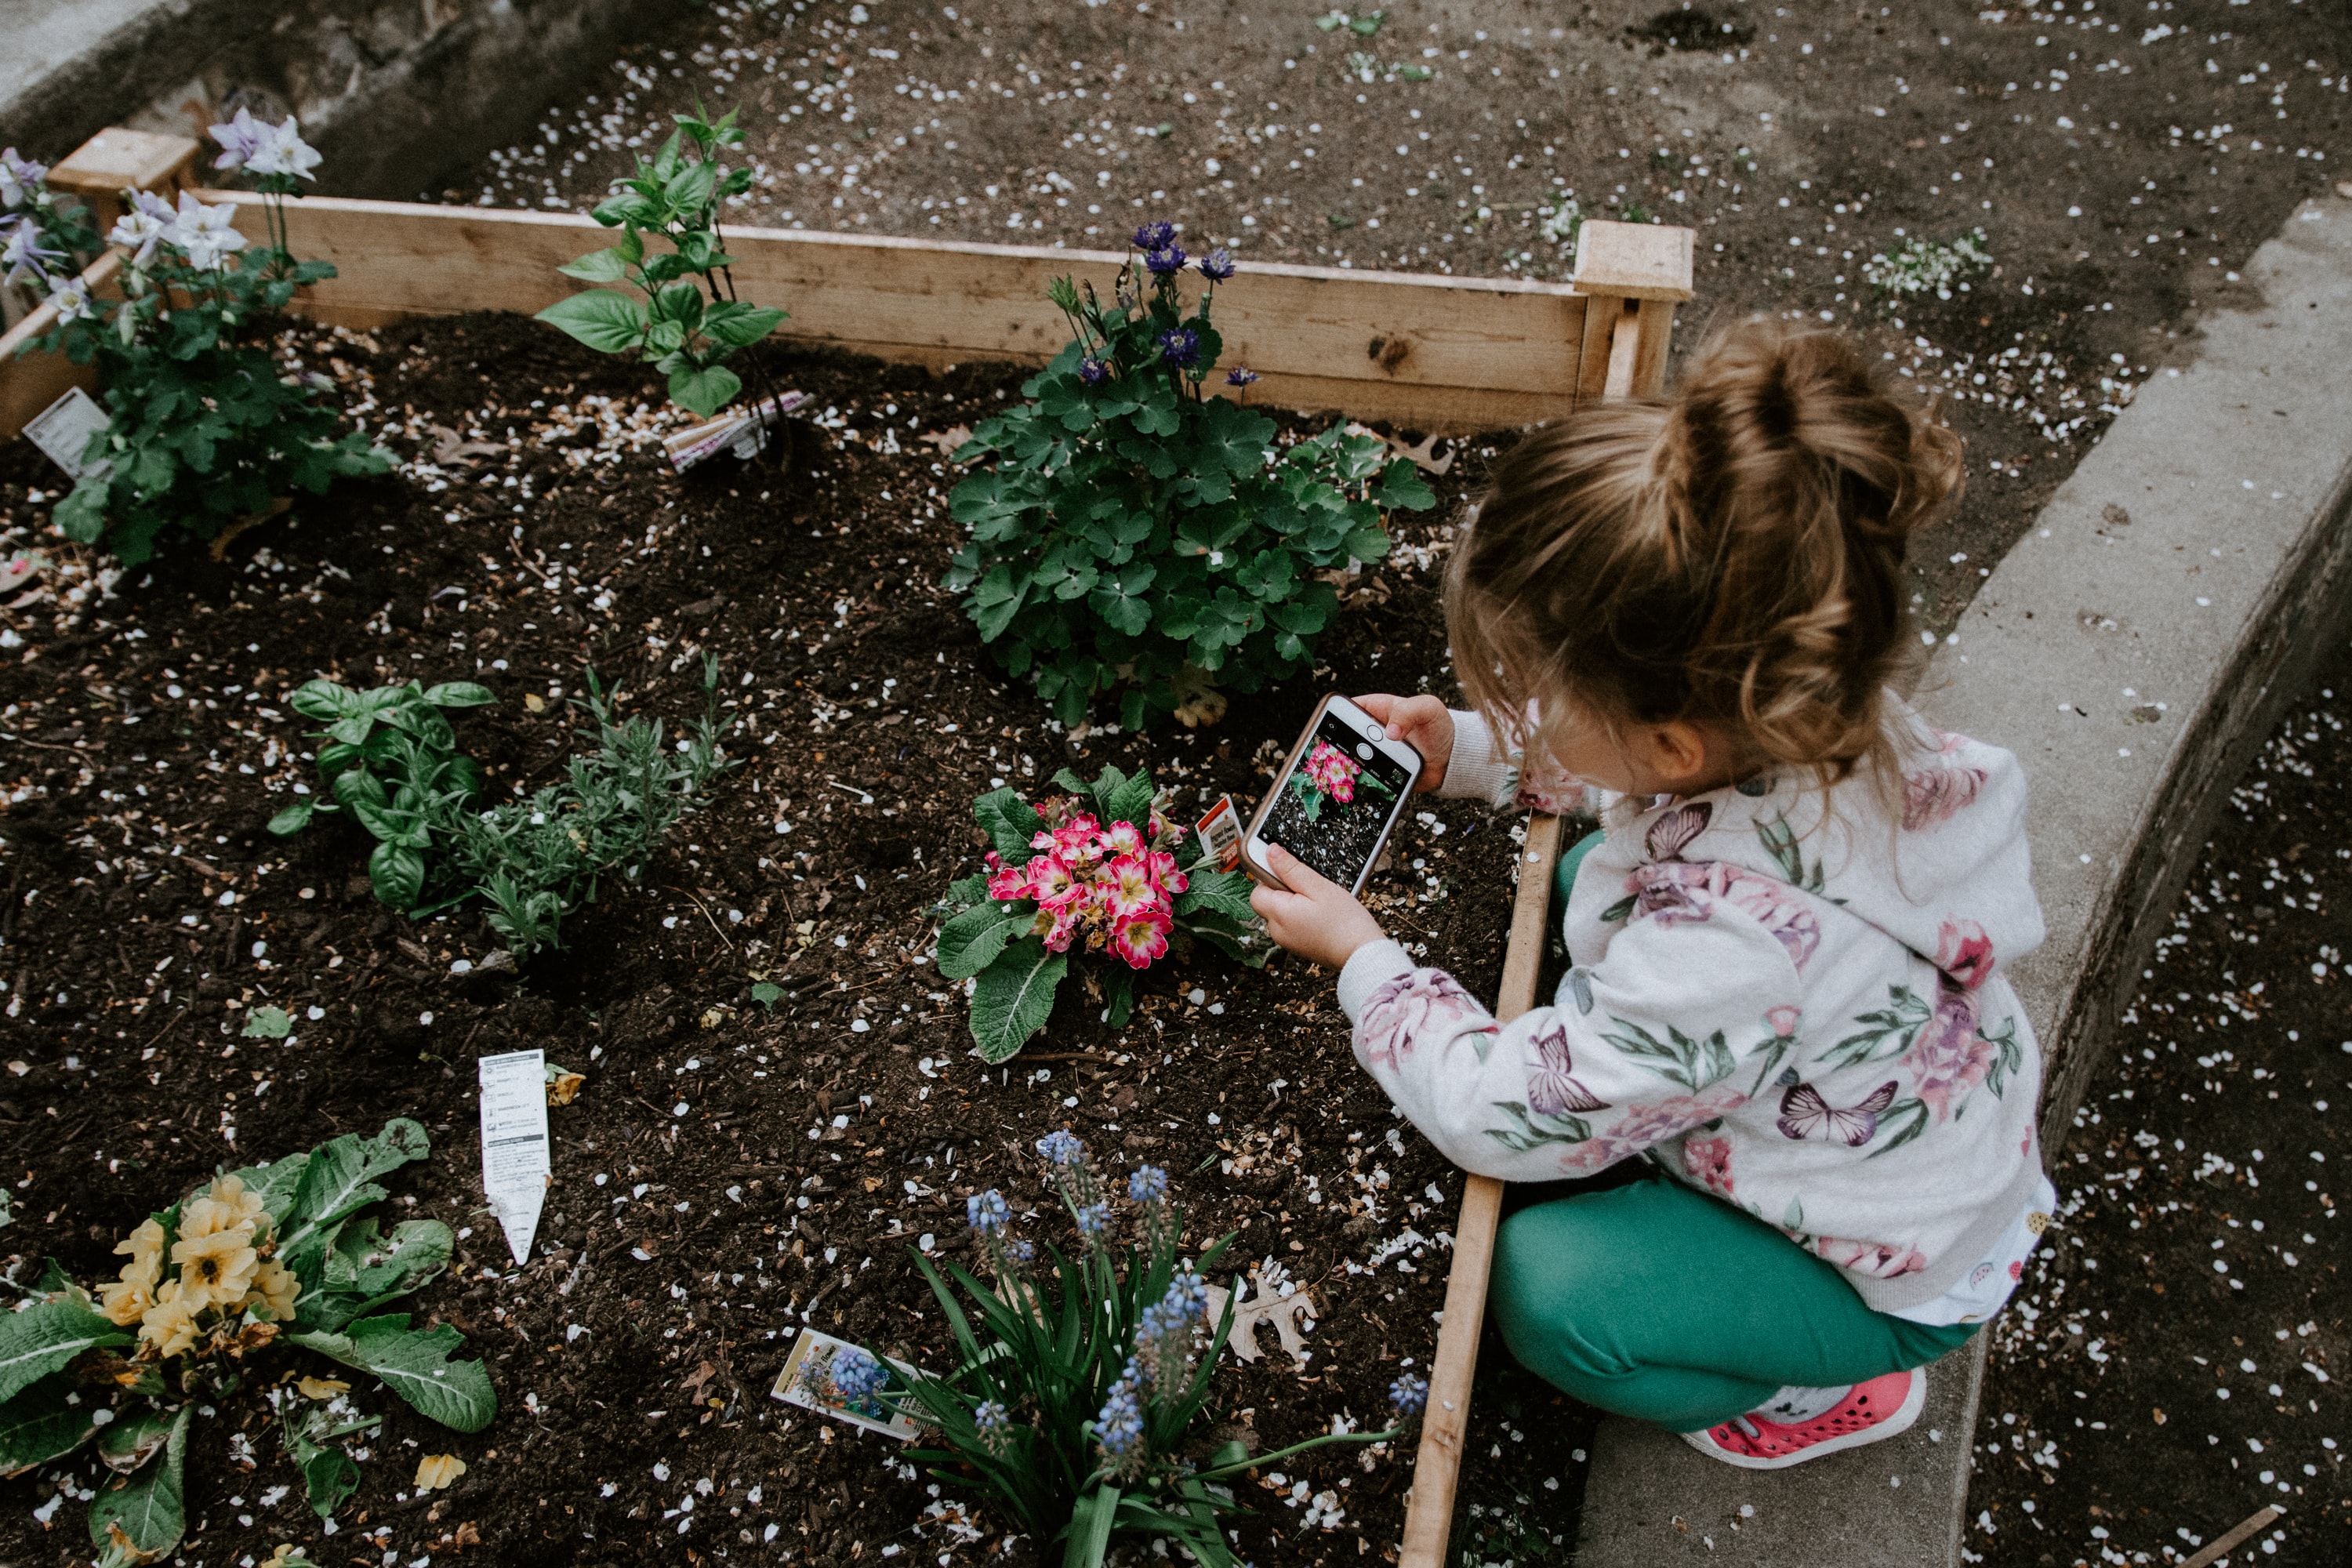 Gardening is a great activity for kids